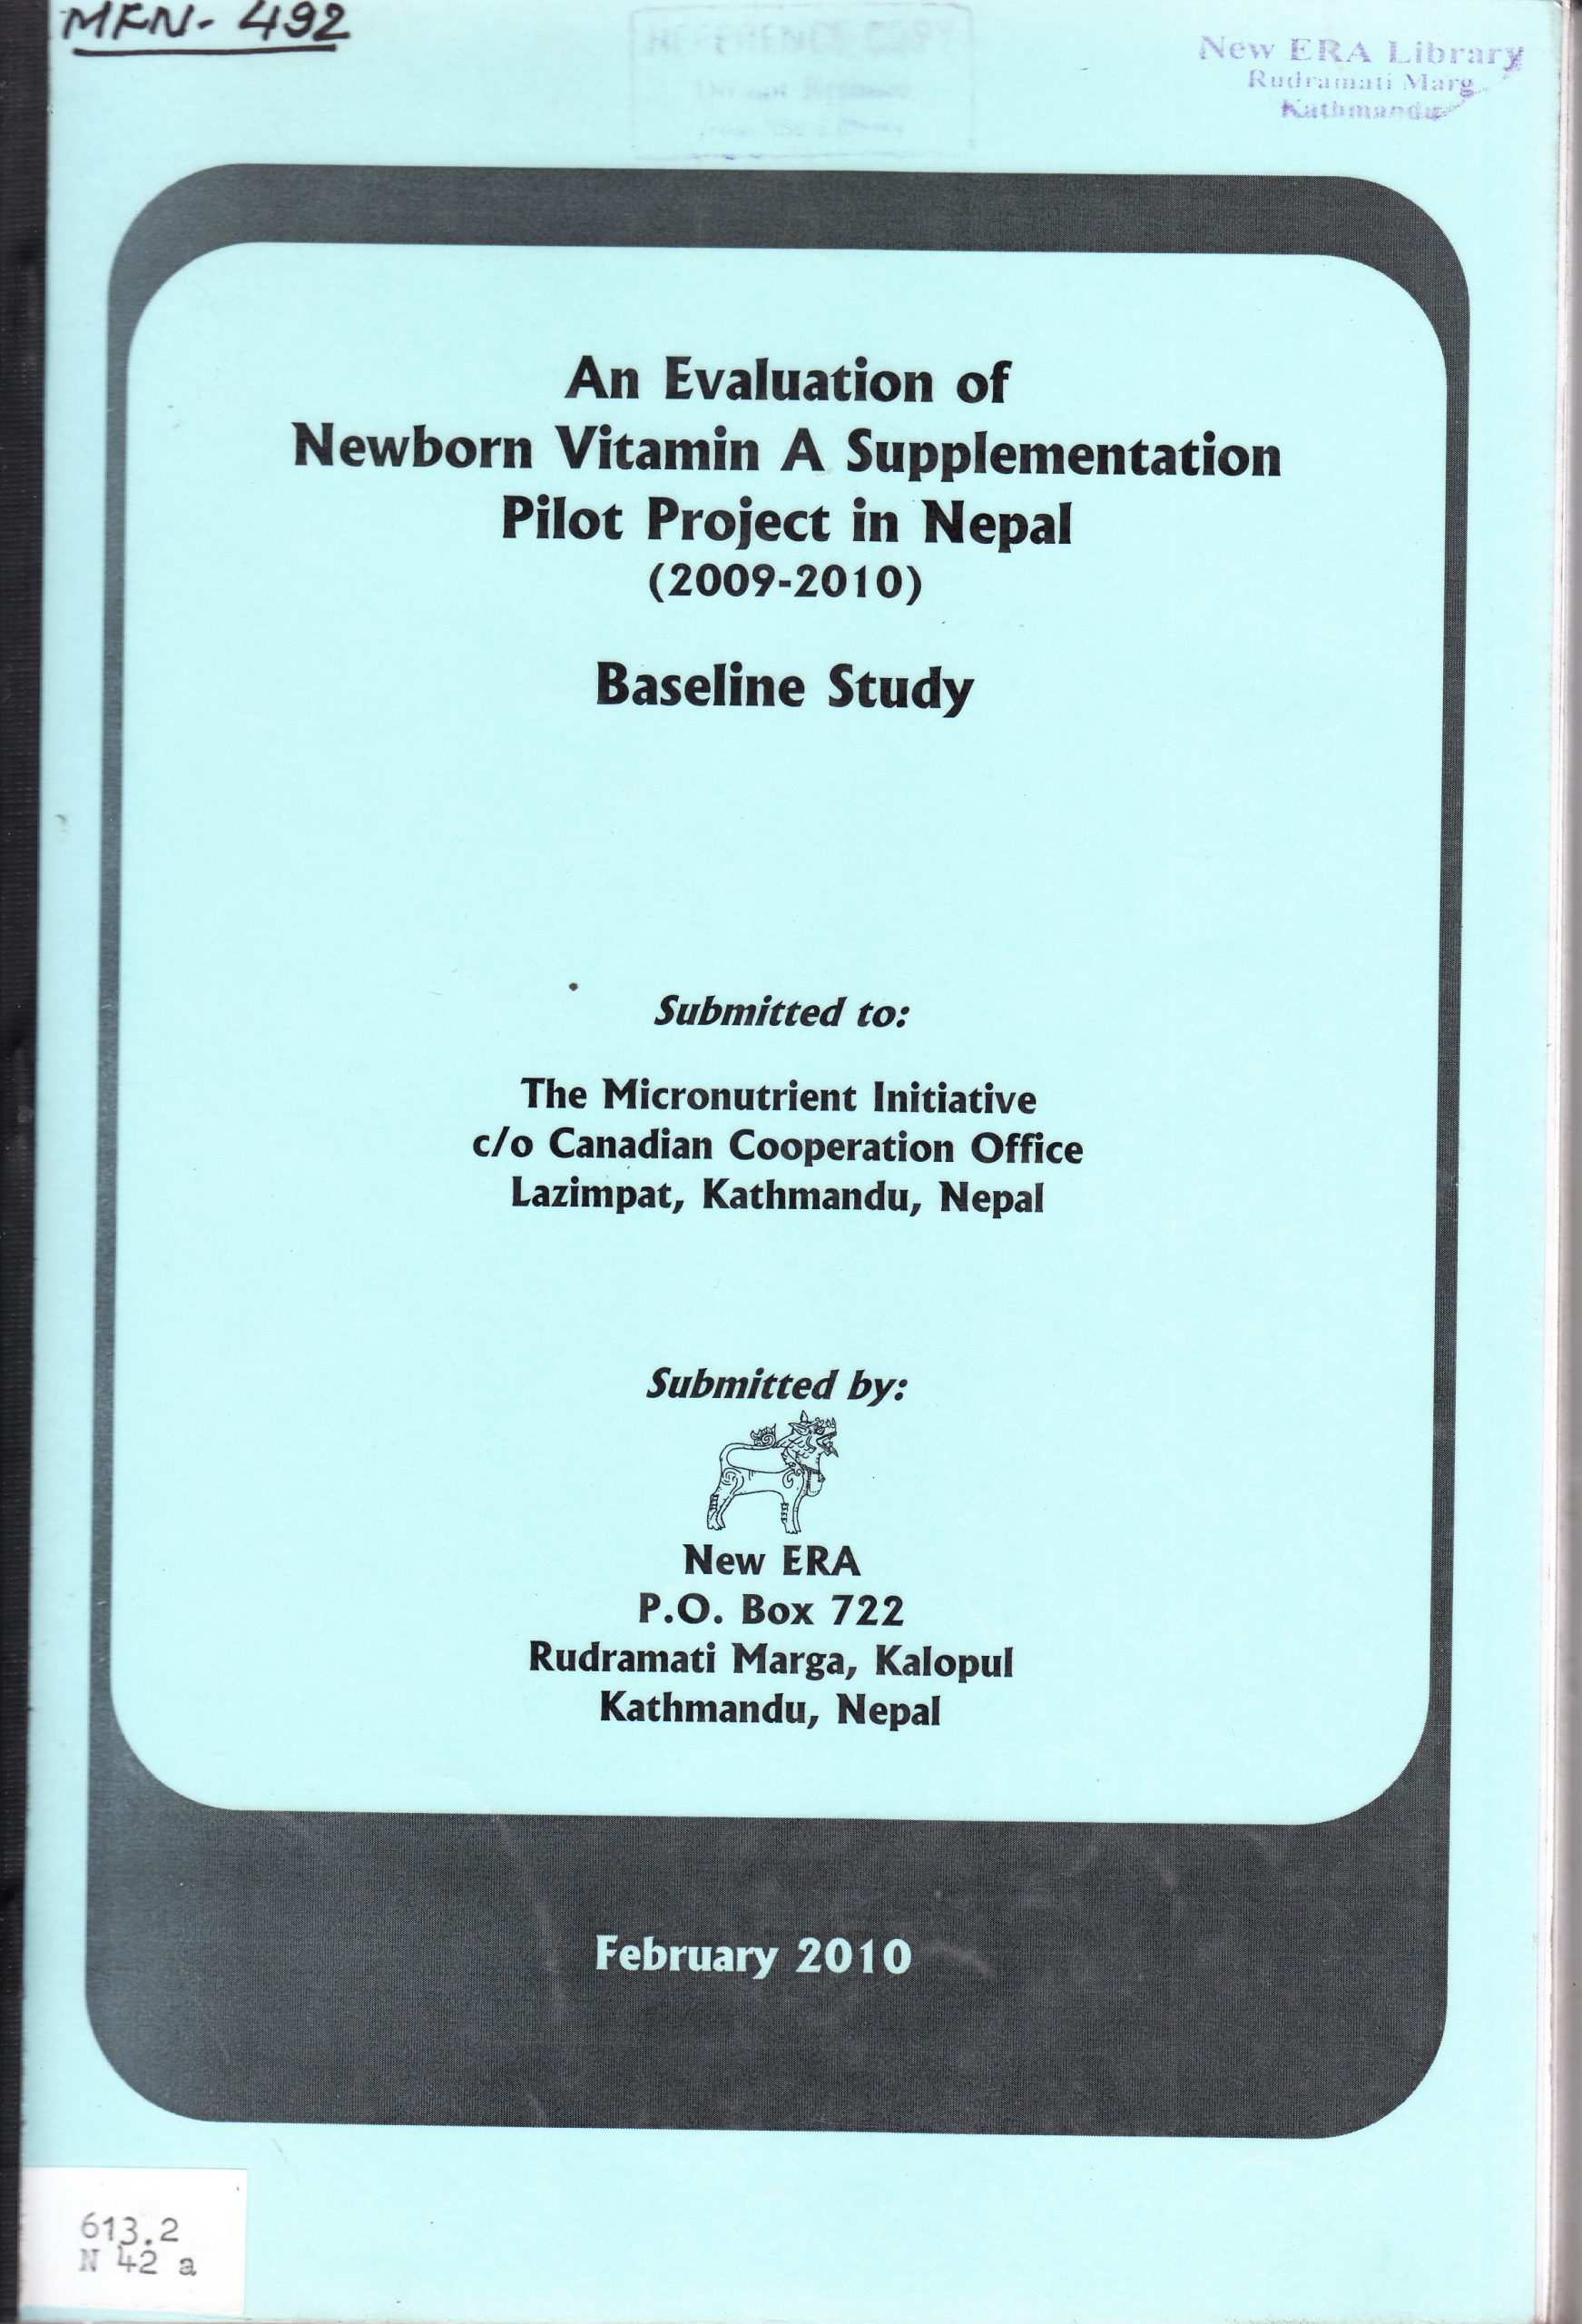 An Evaluation of Newborn Vitamin A Supplementation Pilot Project in Nepal (2009-2010) Baseline Study